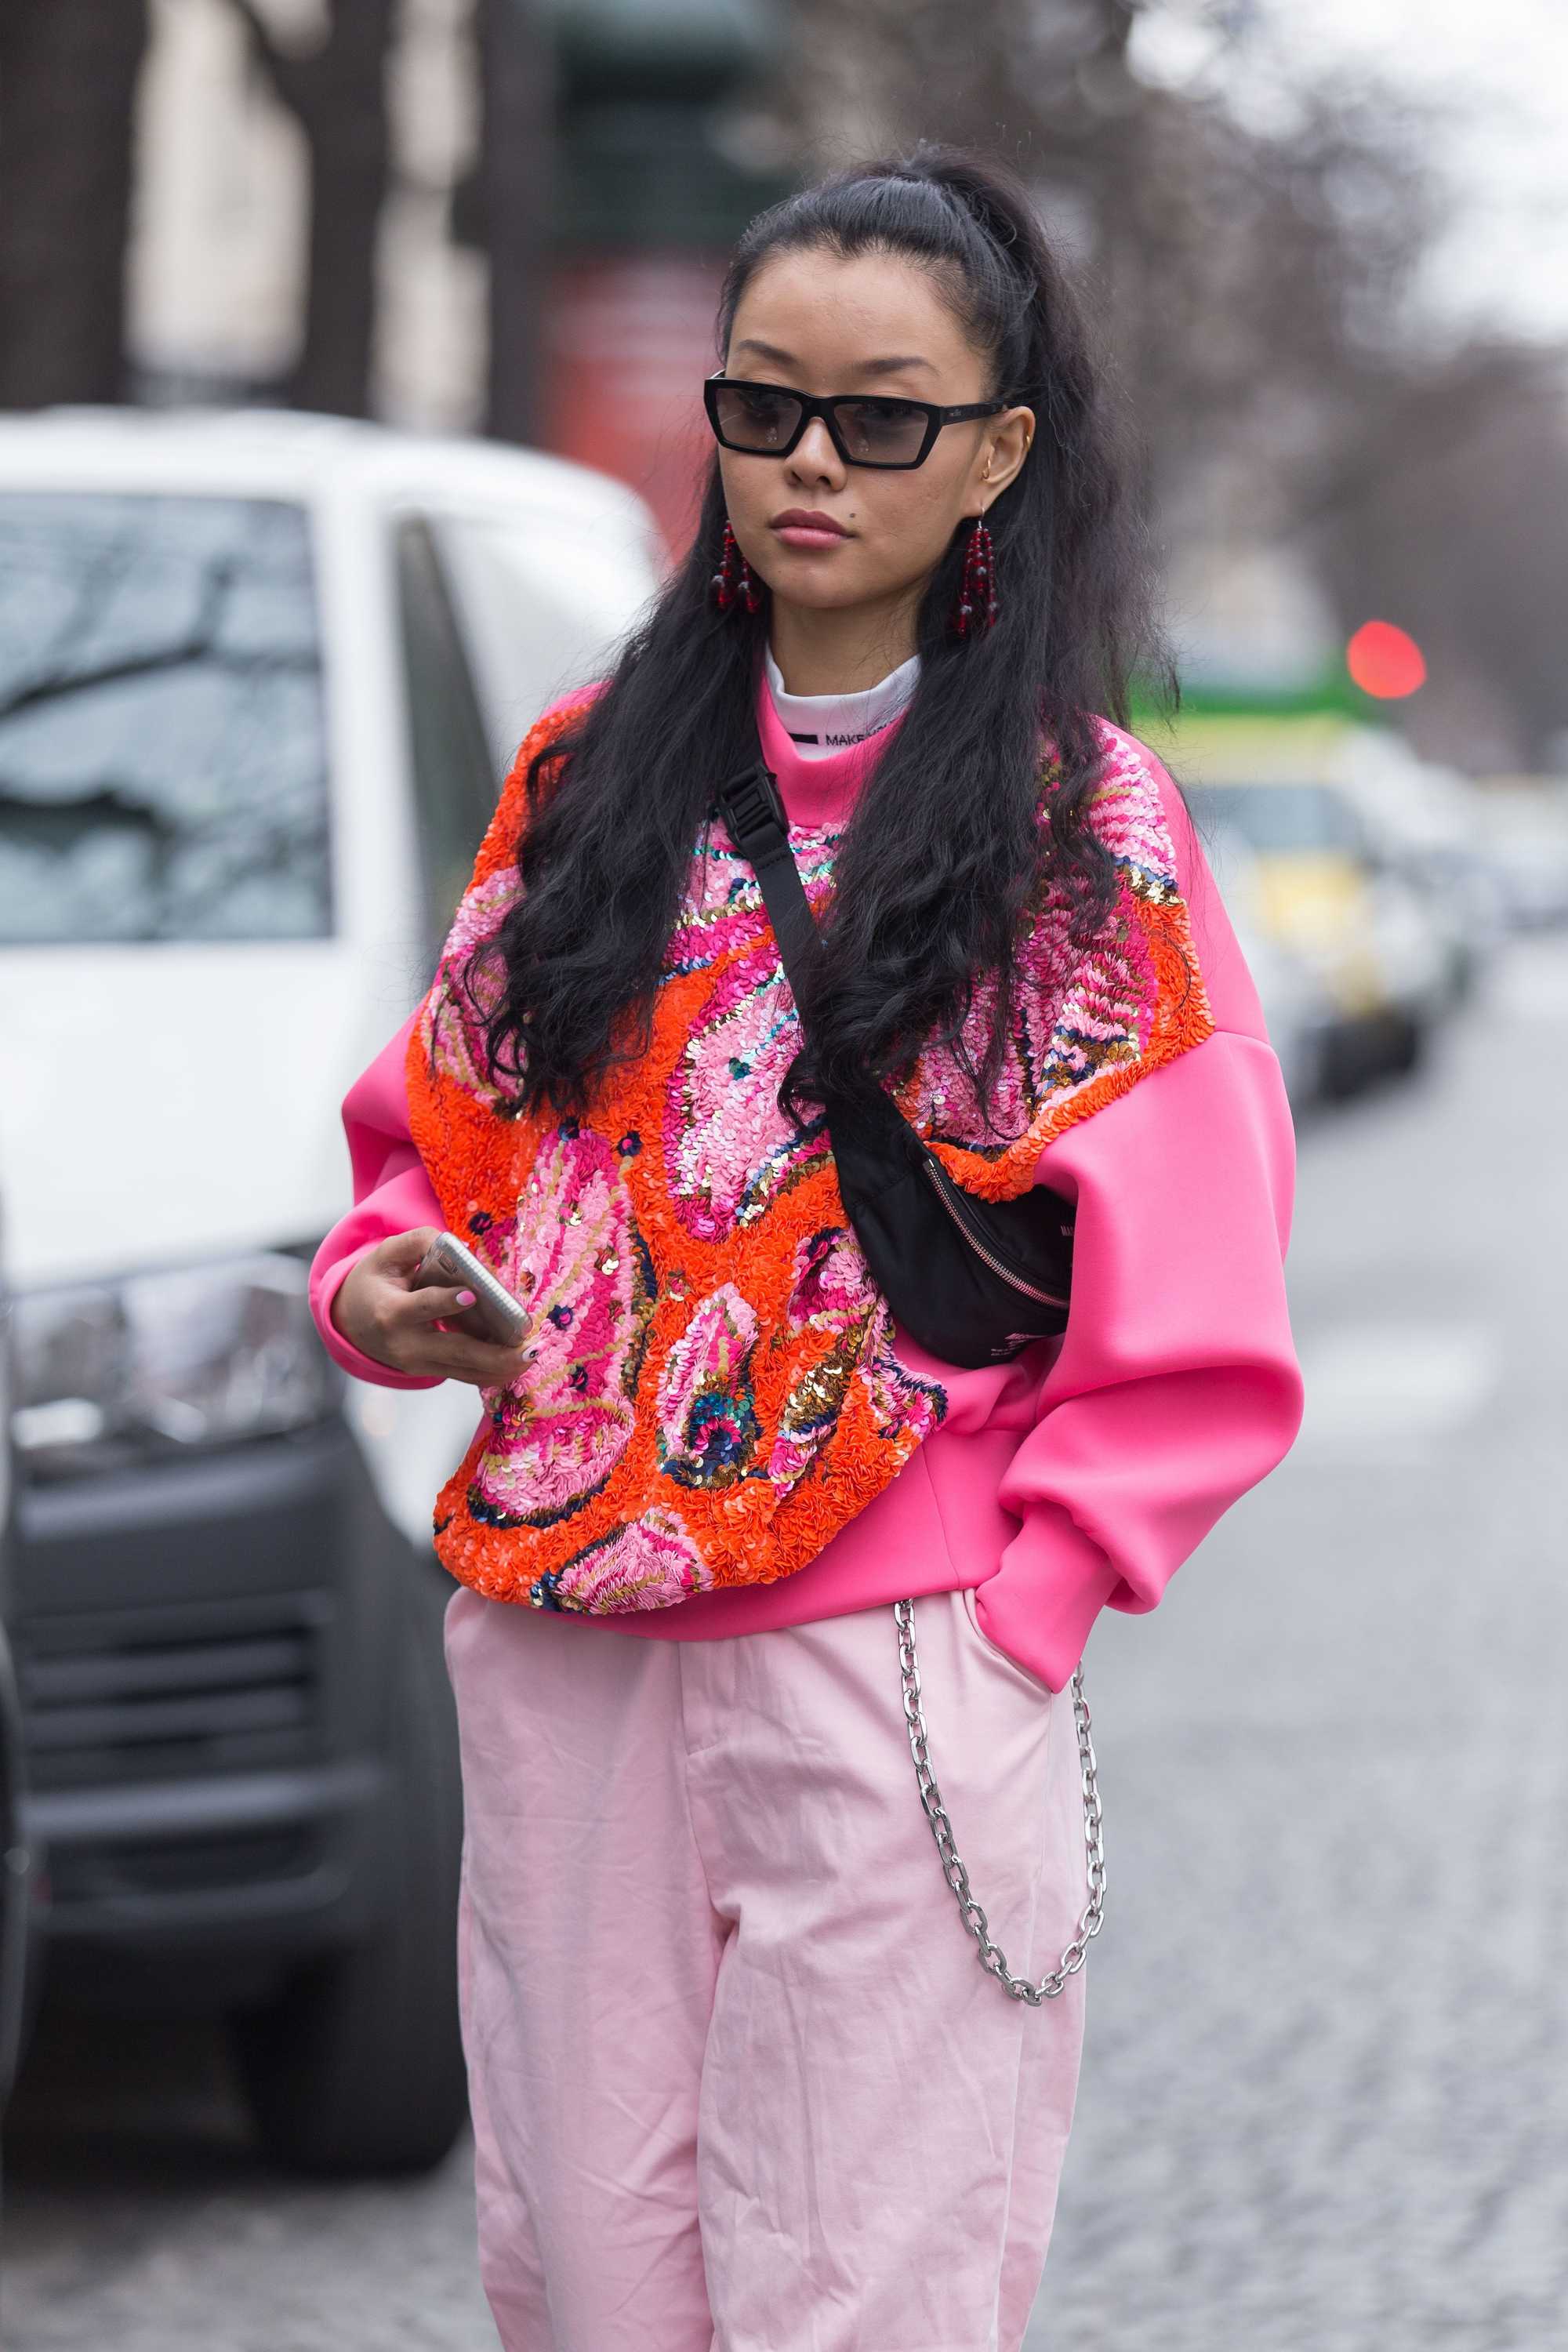 Paris Fashion Week Street Style: Woman with long brown hair in half-up, half-down ponytail wearing sunglasses